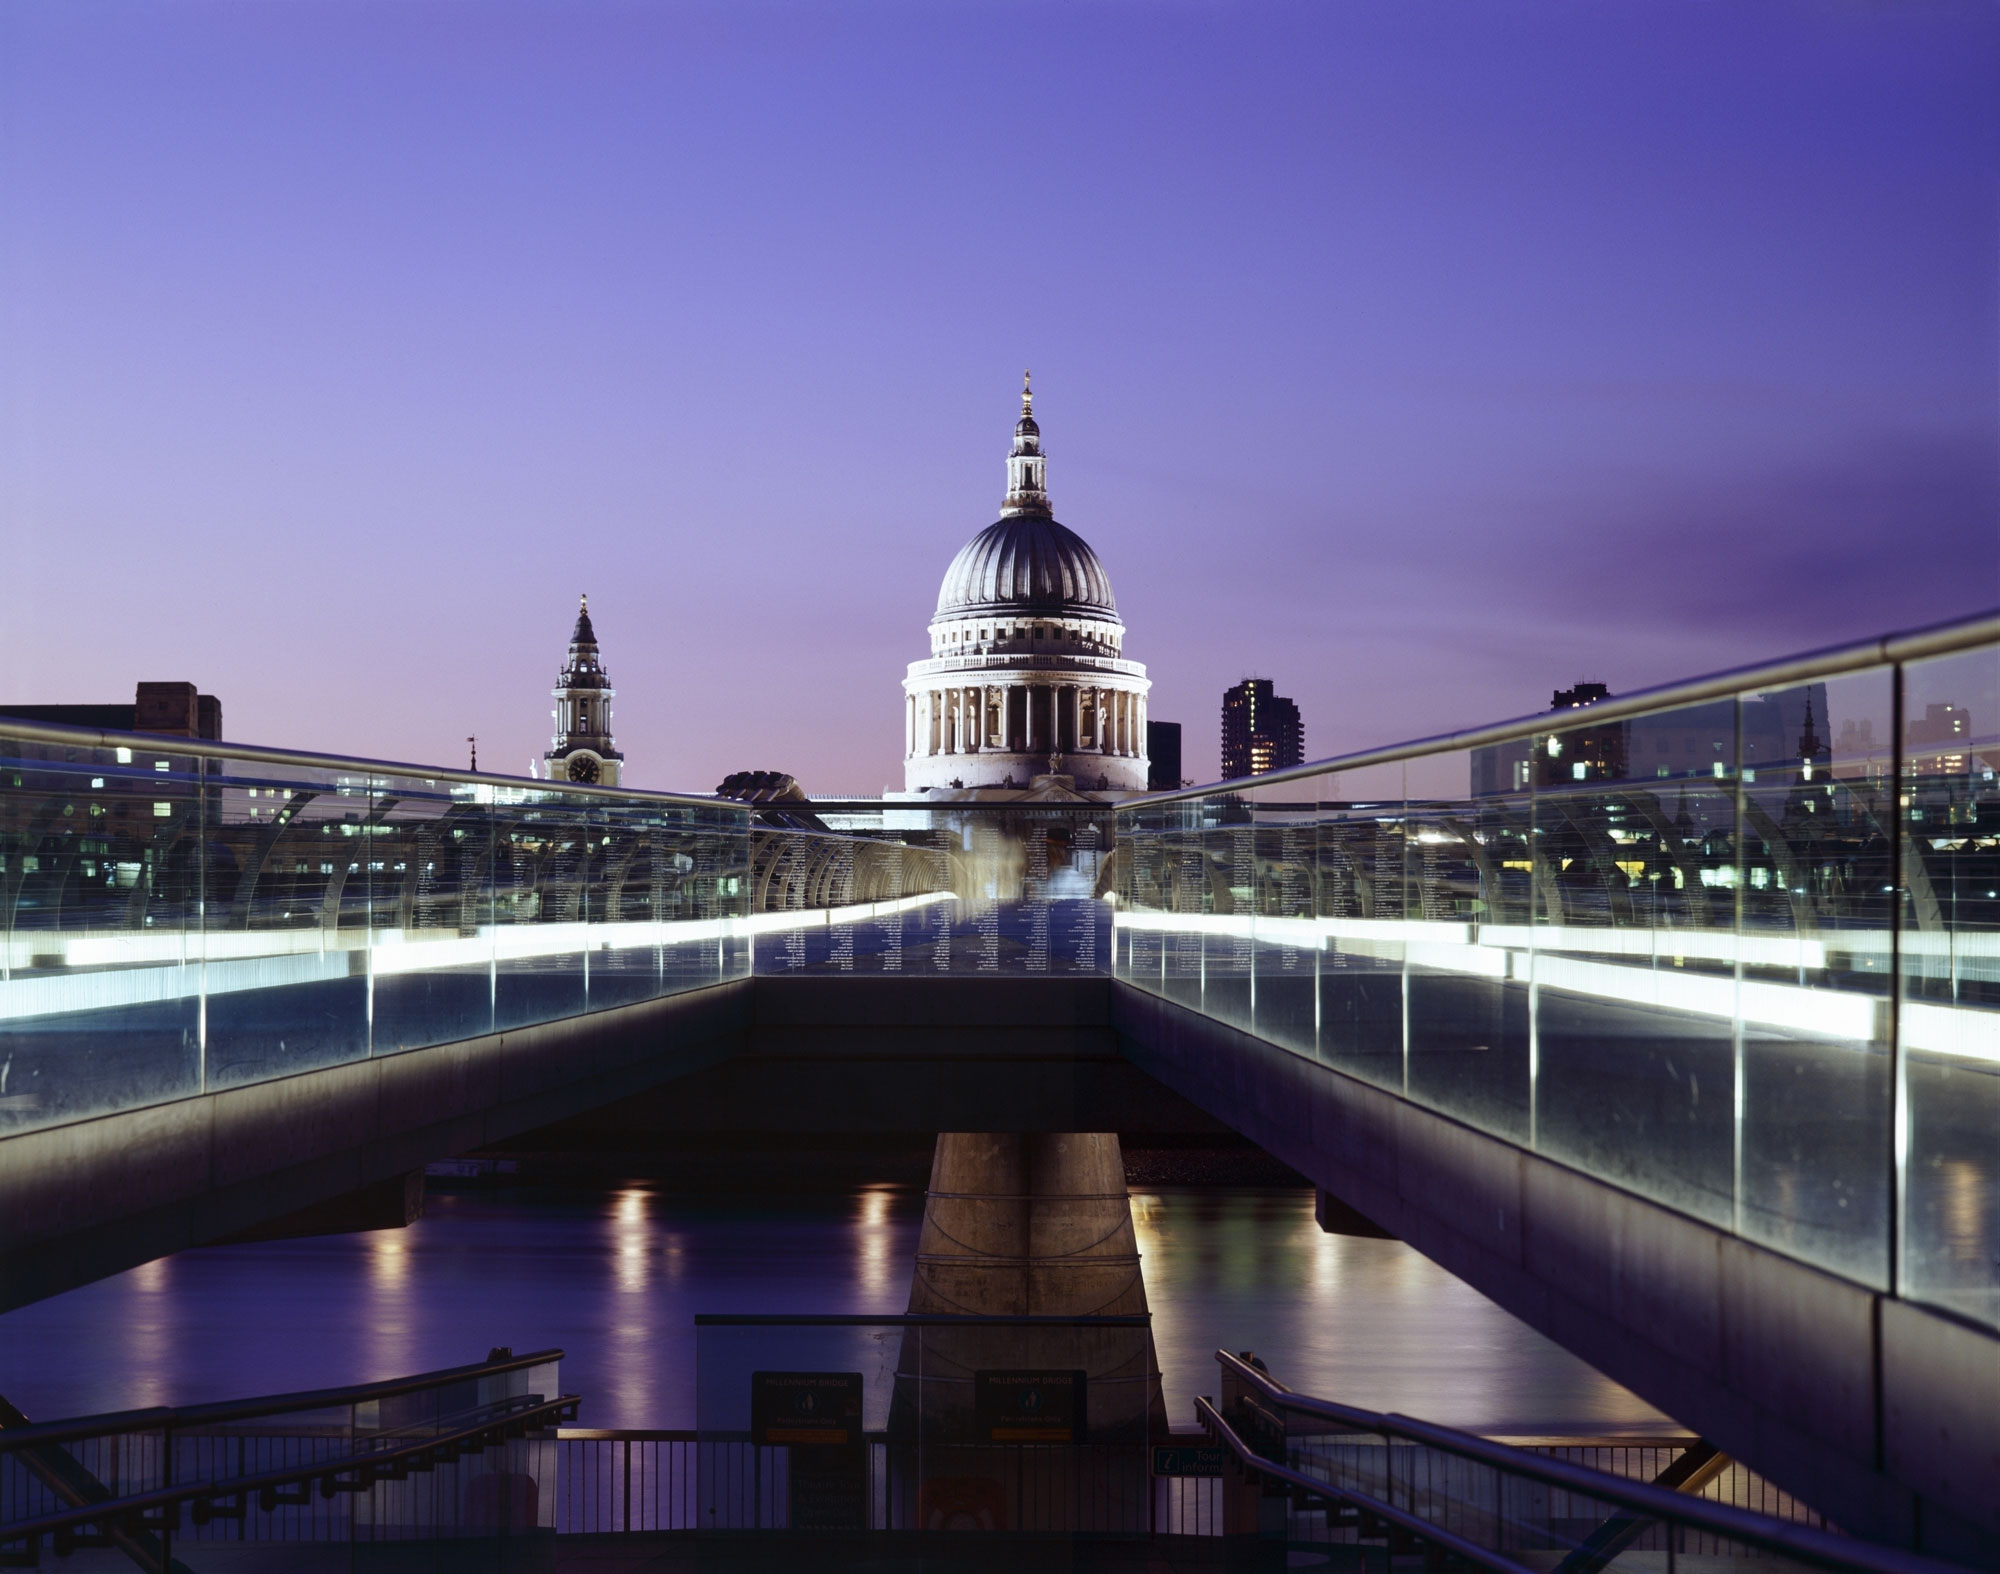 St Paul's Cathedral and the London skyline viewed across the Millennium Bridge.